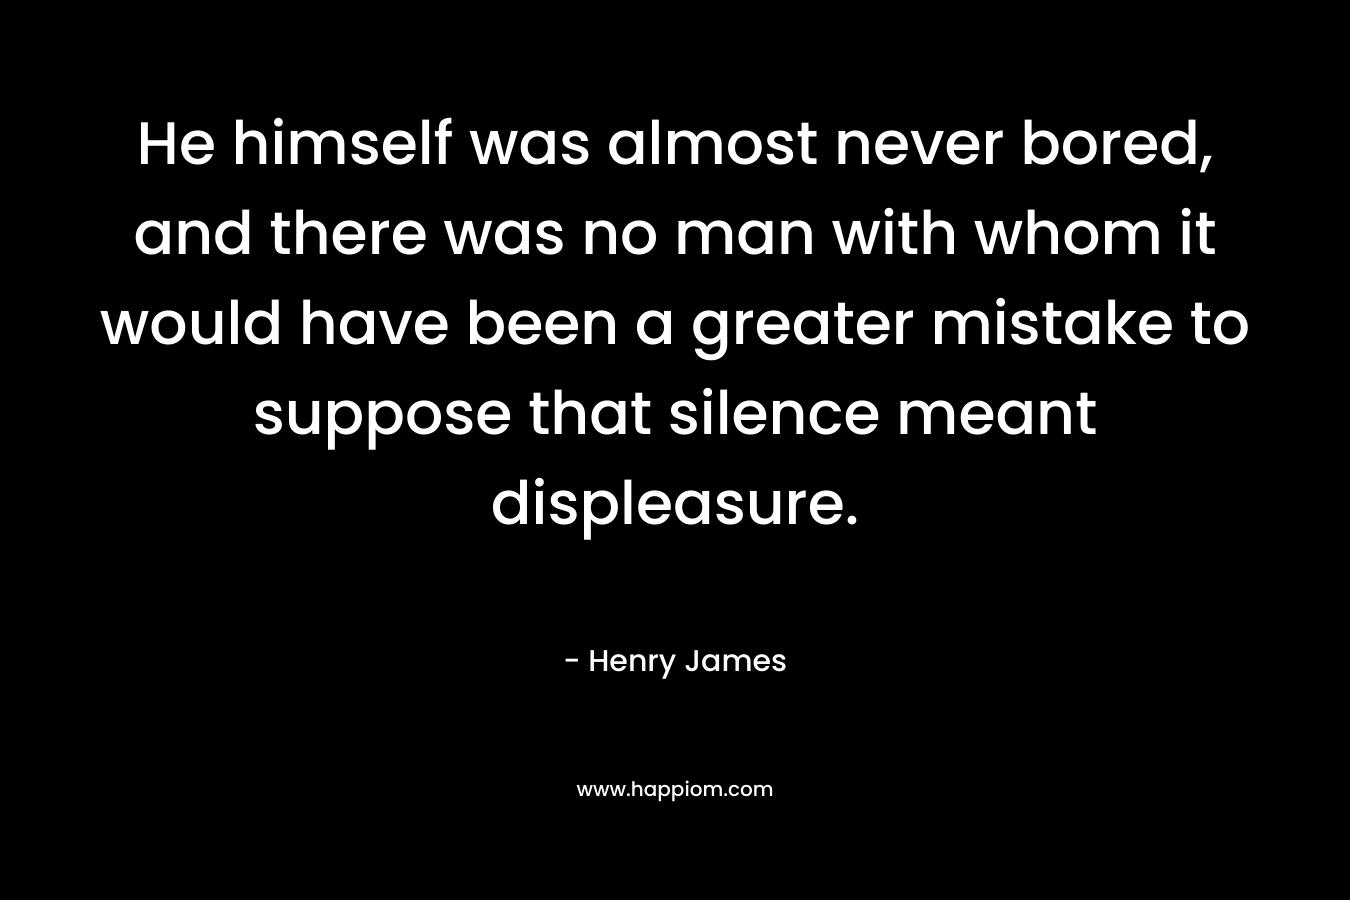 He himself was almost never bored, and there was no man with whom it would have been a greater mistake to suppose that silence meant displeasure.